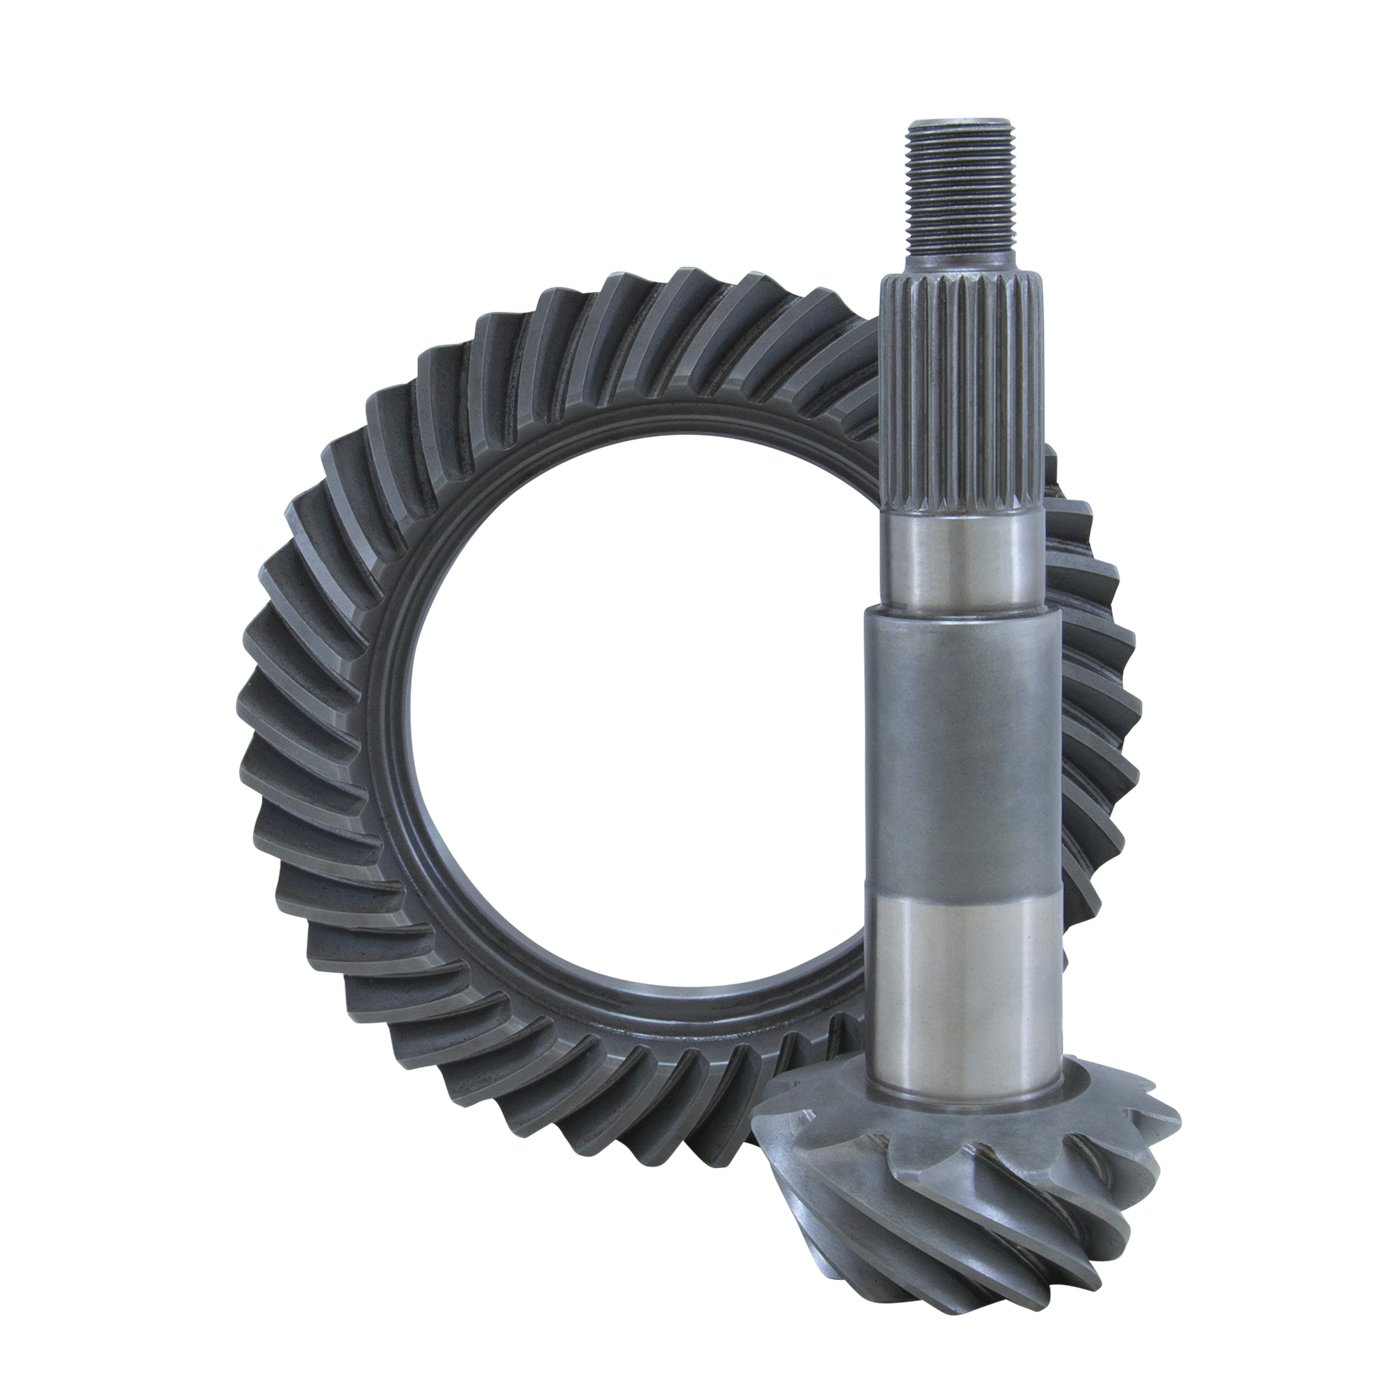 USA Standard ZG D30-488 Ring & Pinion Replacement Gear Set, For Dana 30, 4.88 Ratio